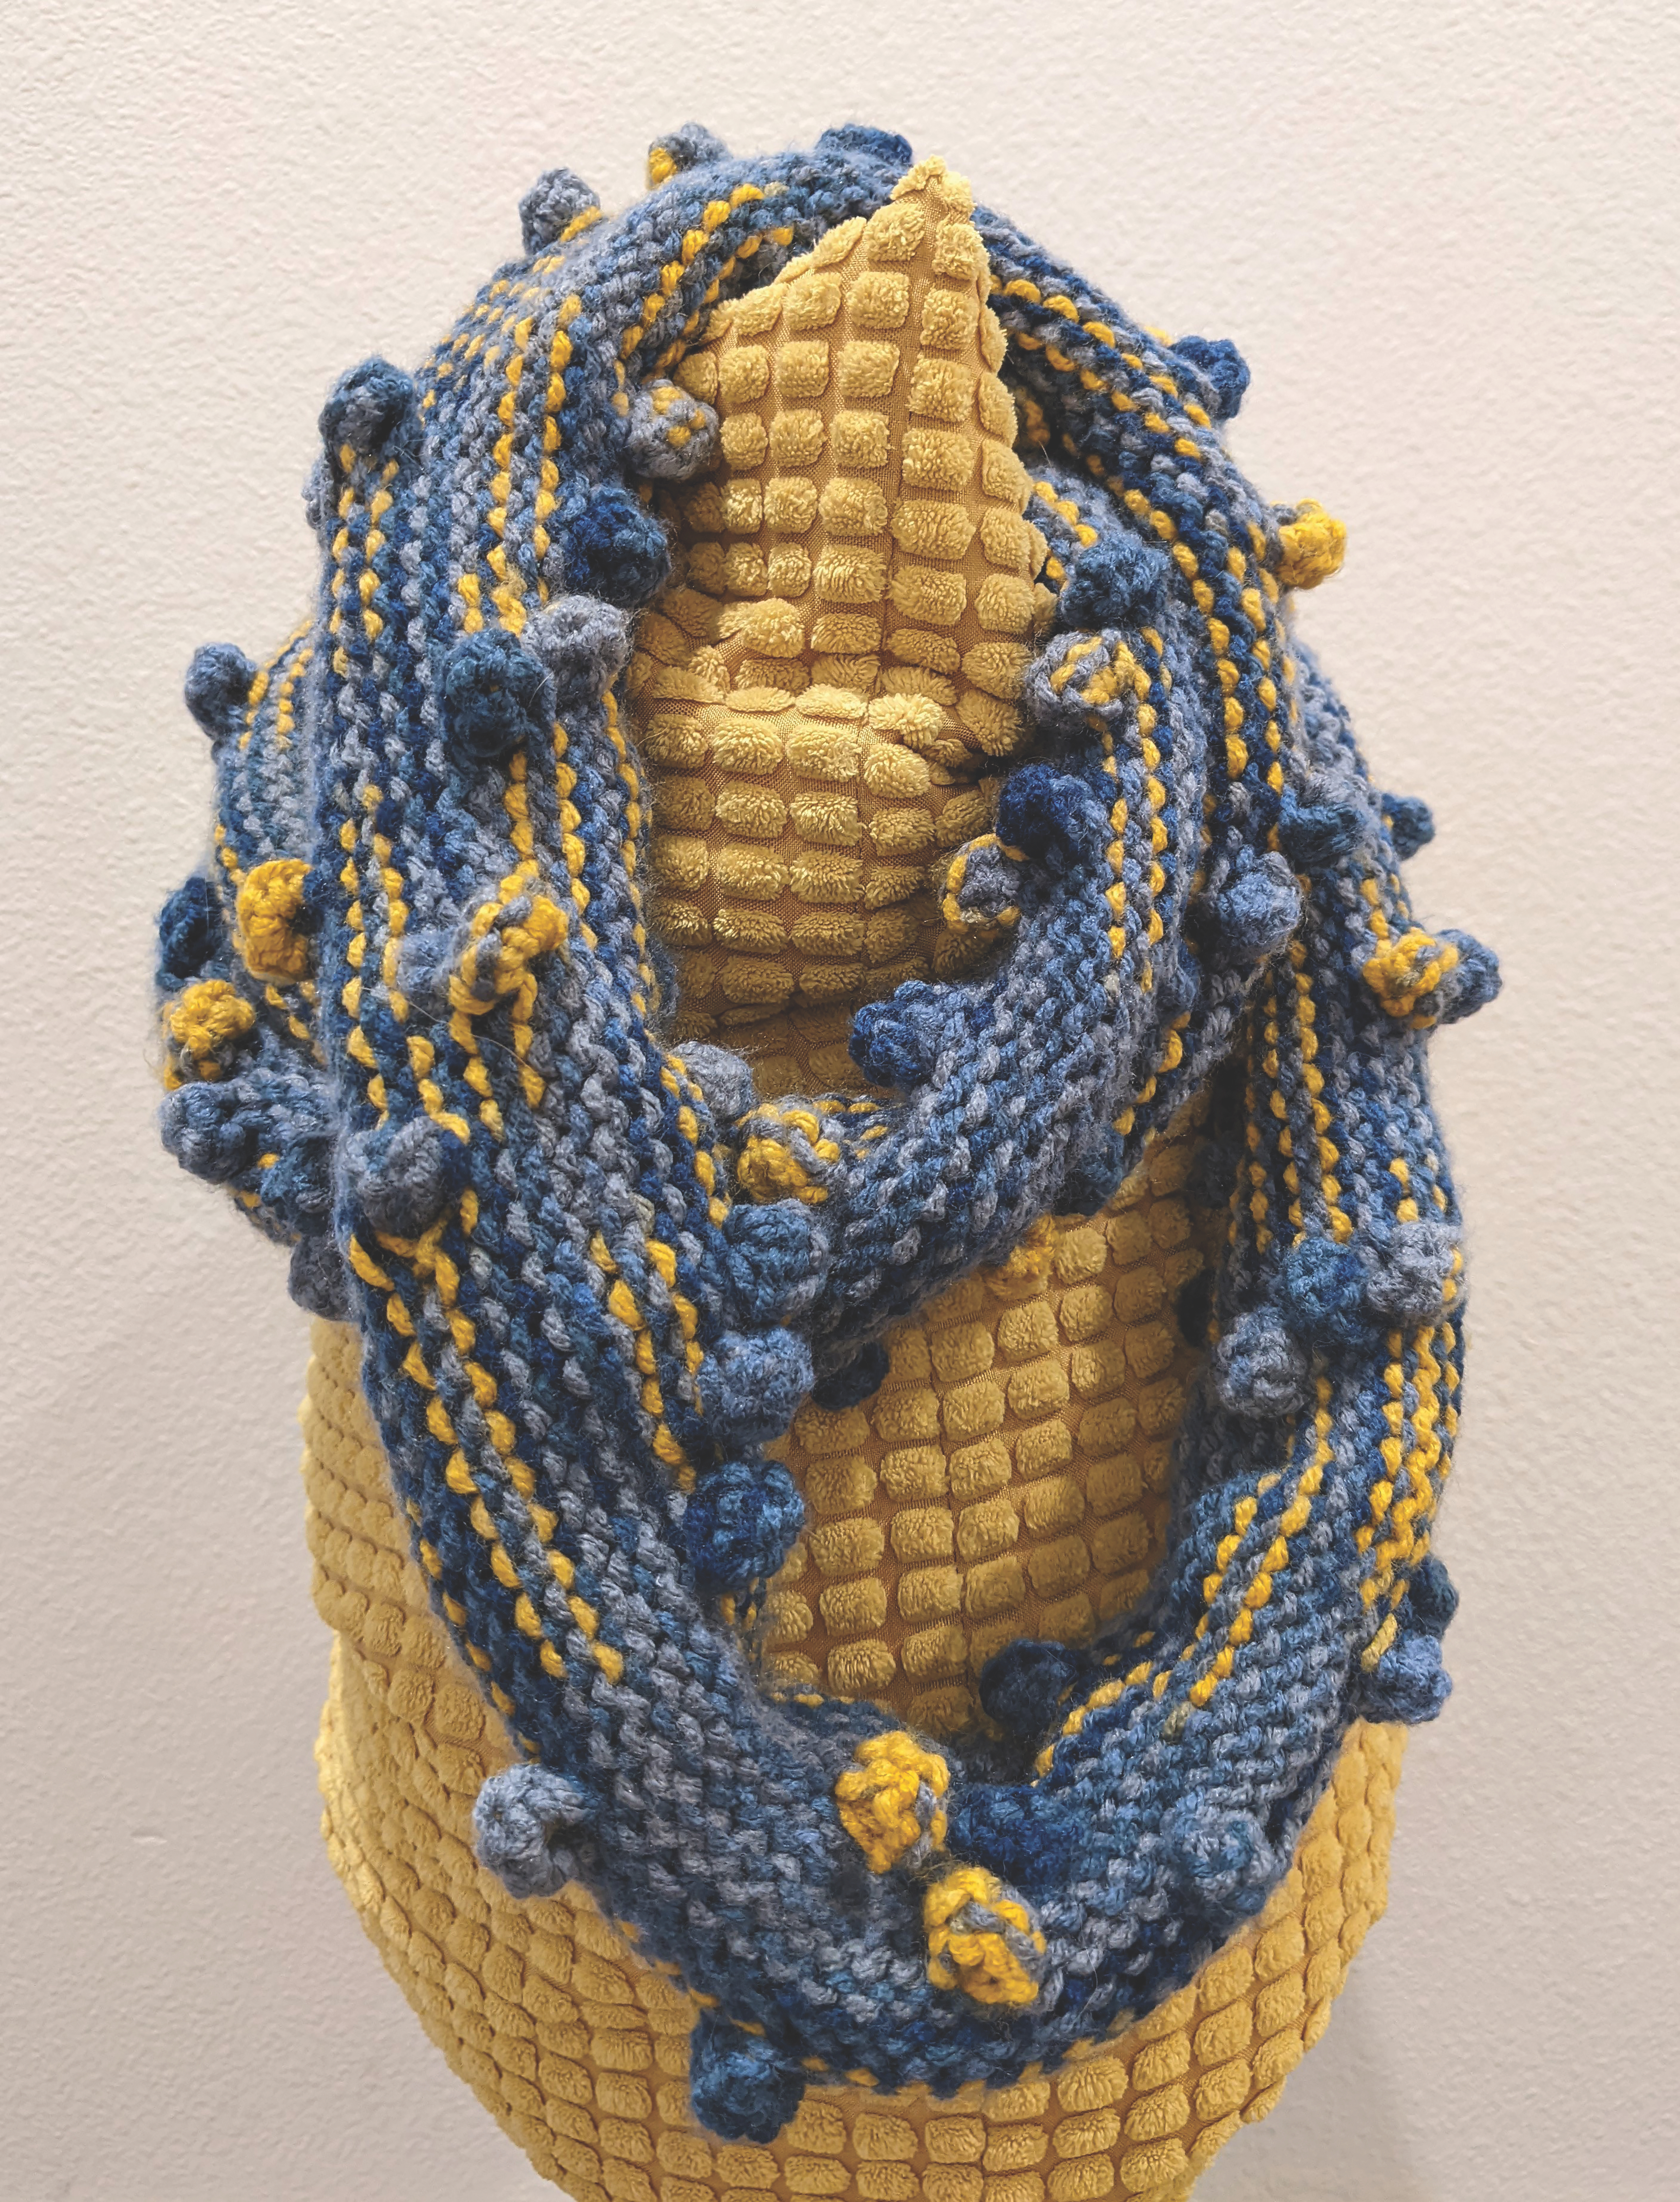 A scarf with bobbles, knitted with blue and yellow yarn, draped on a yellow cushion.